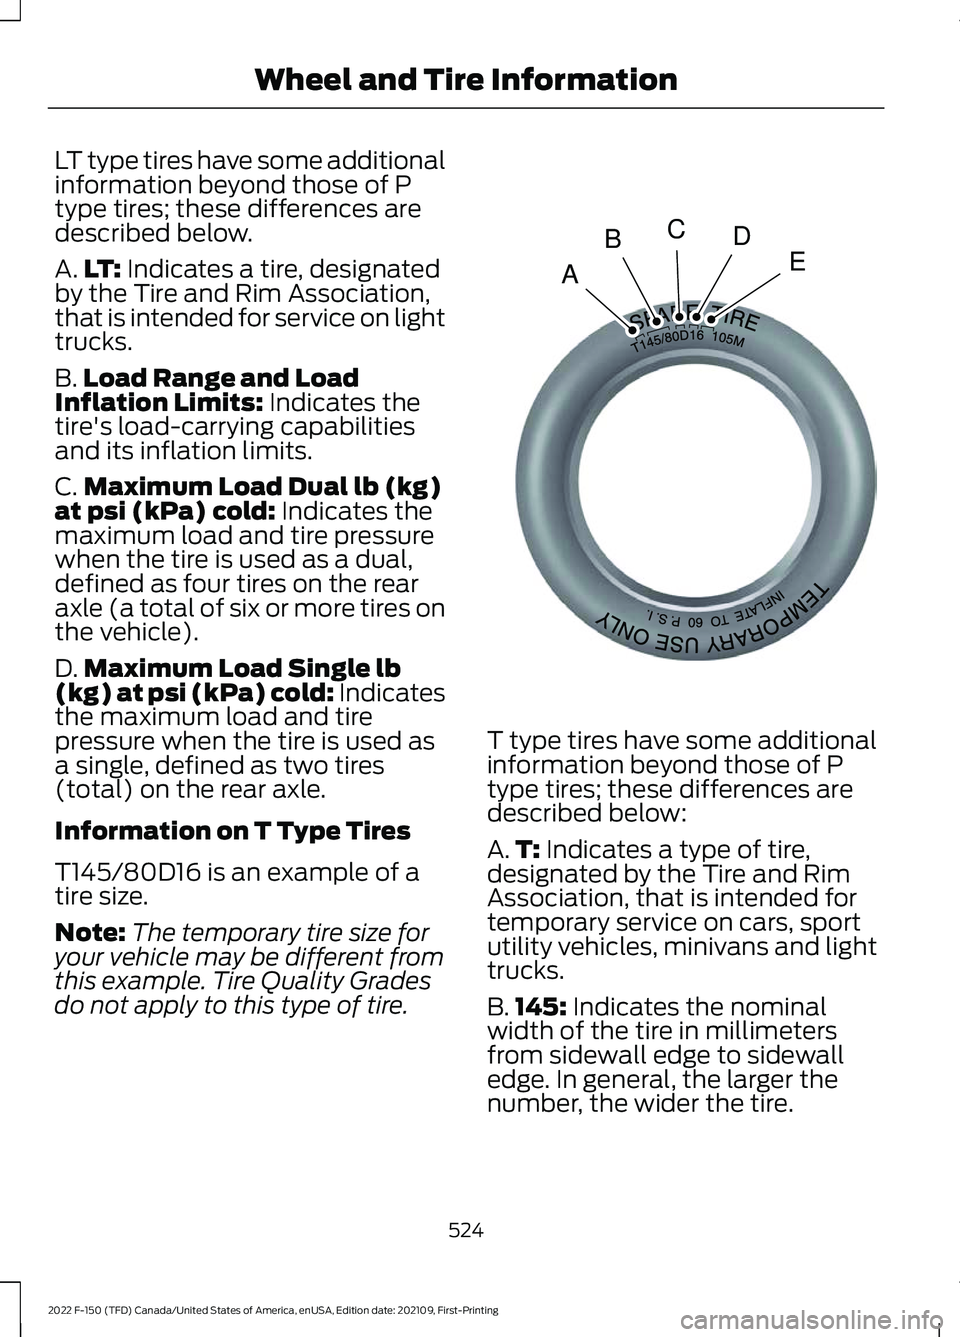 FORD F-150 2022  Owners Manual LT type tires have some additional
information beyond those of P
type tires; these differences are
described below.
A.
LT: Indicates a tire, designated
by the Tire and Rim Association,
that is intende